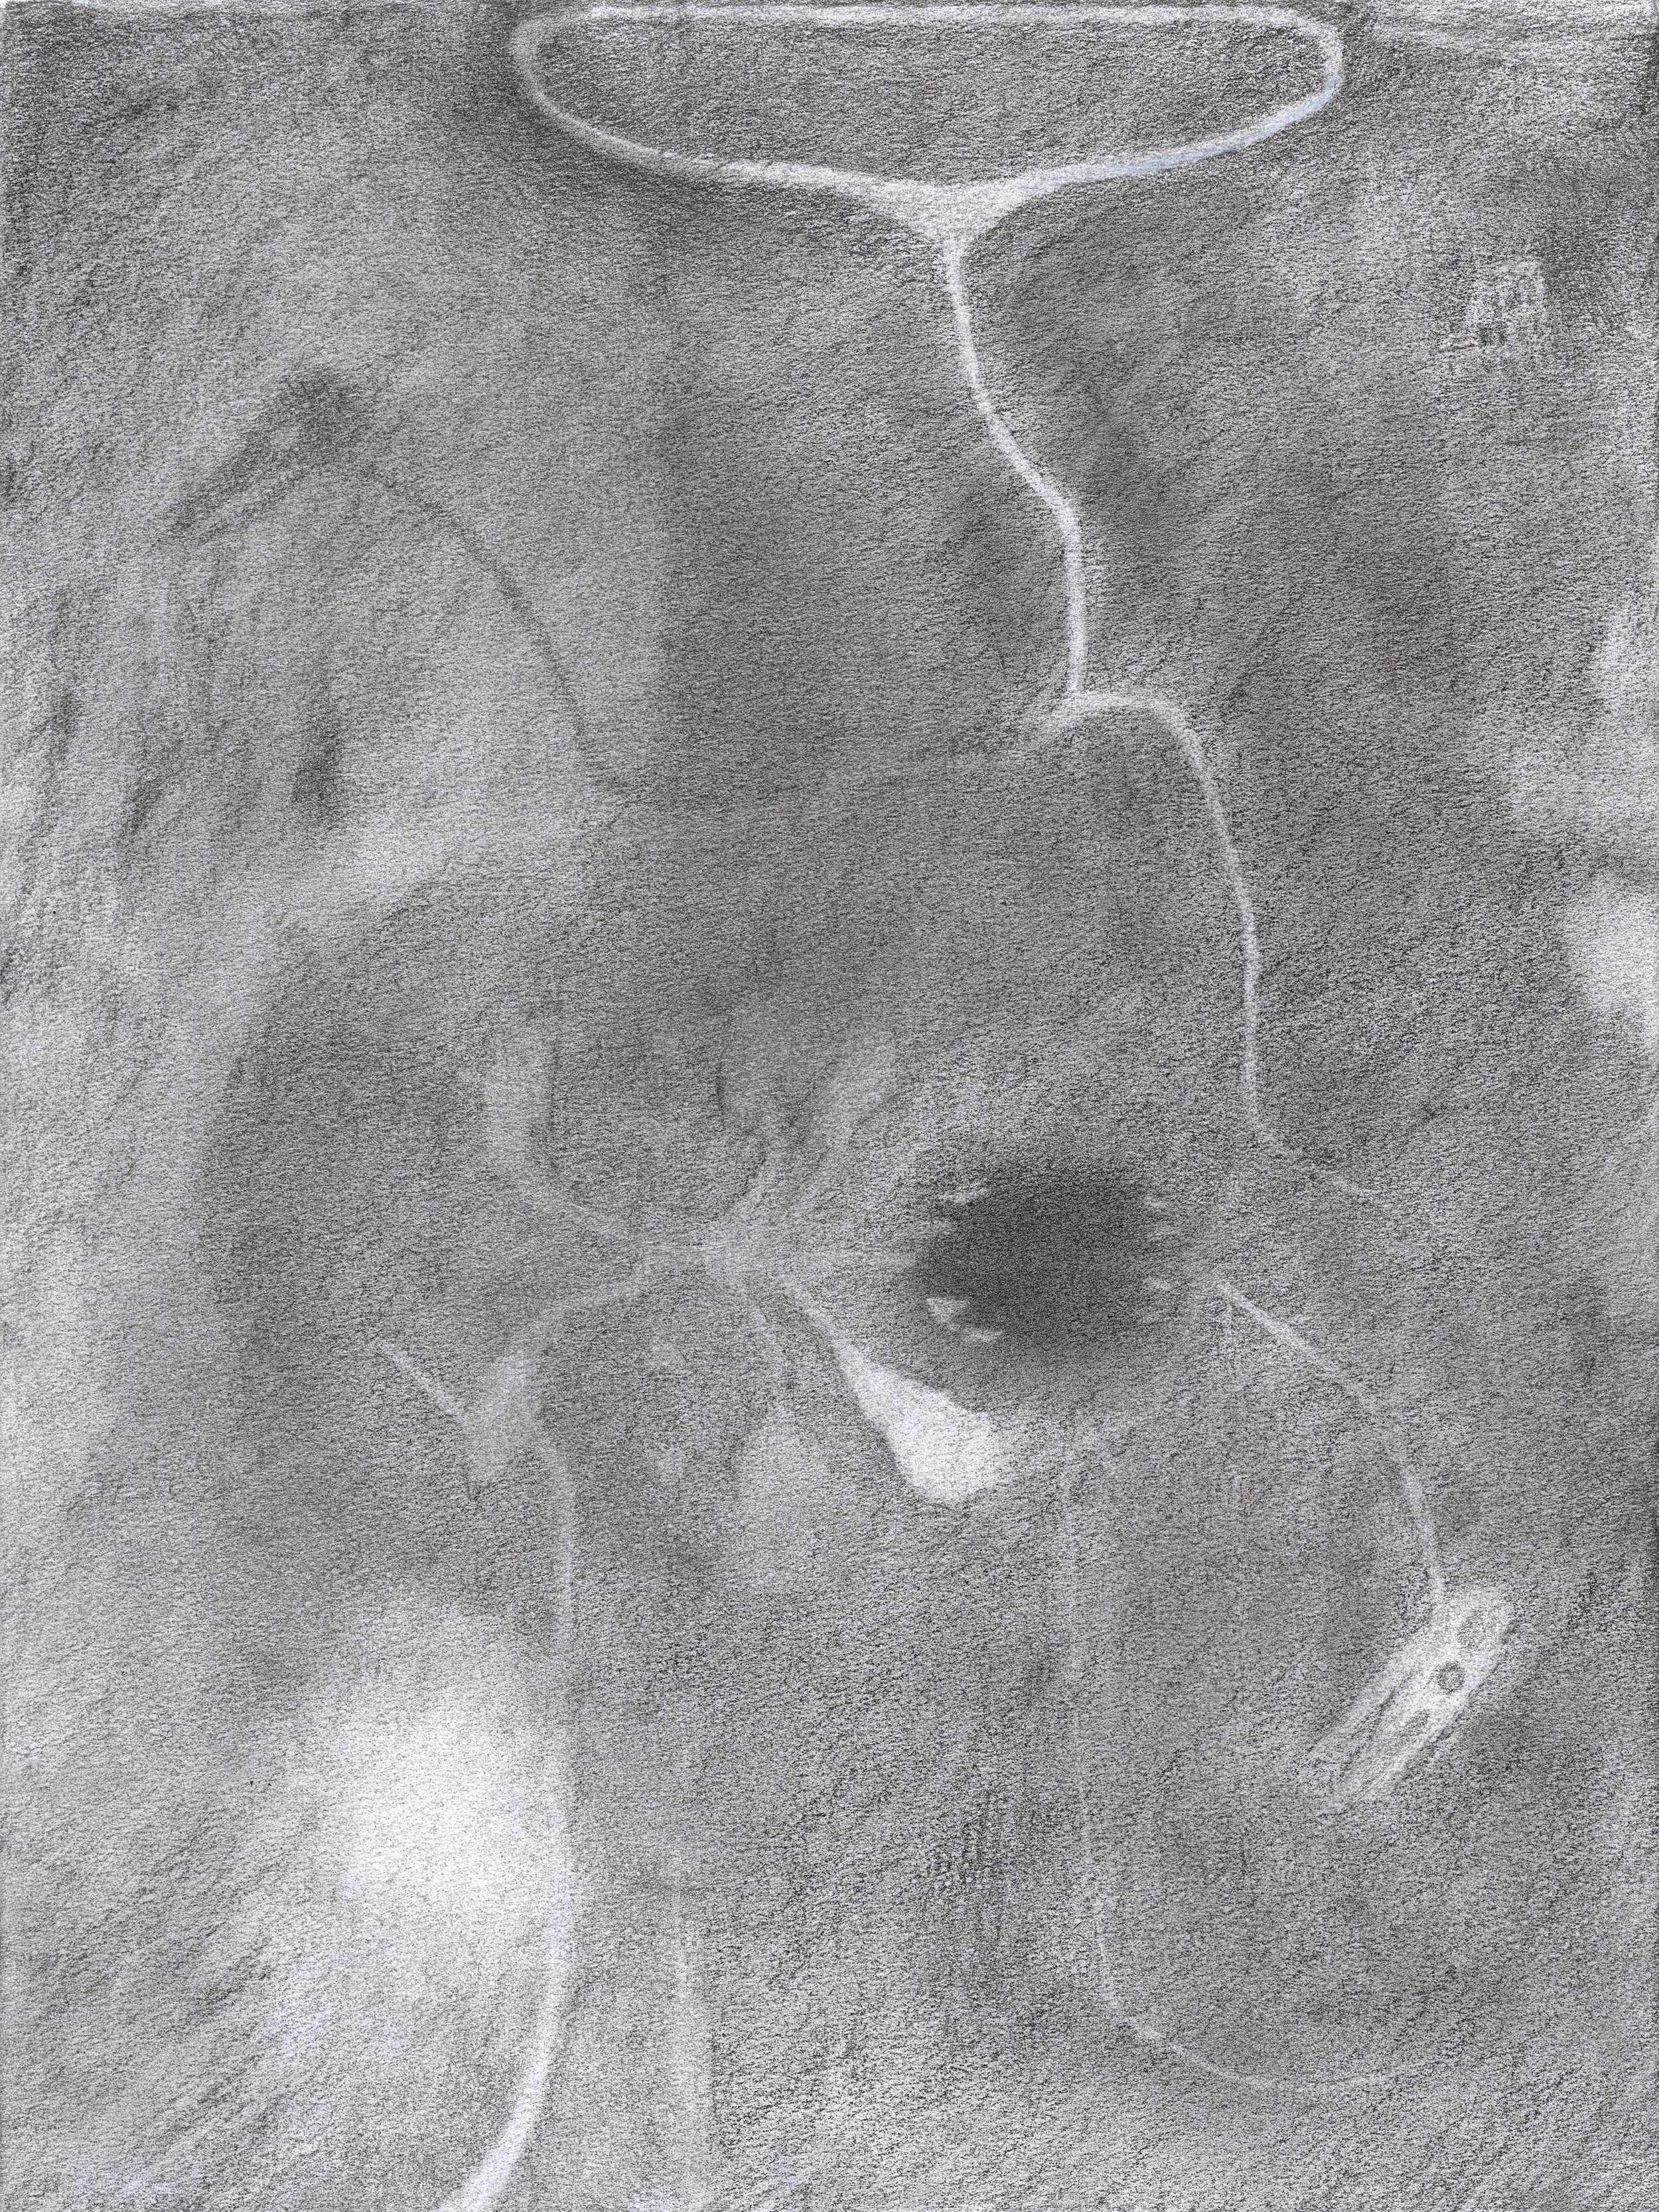   Untitled , 2023, graphite on paper, 12” x 9” 